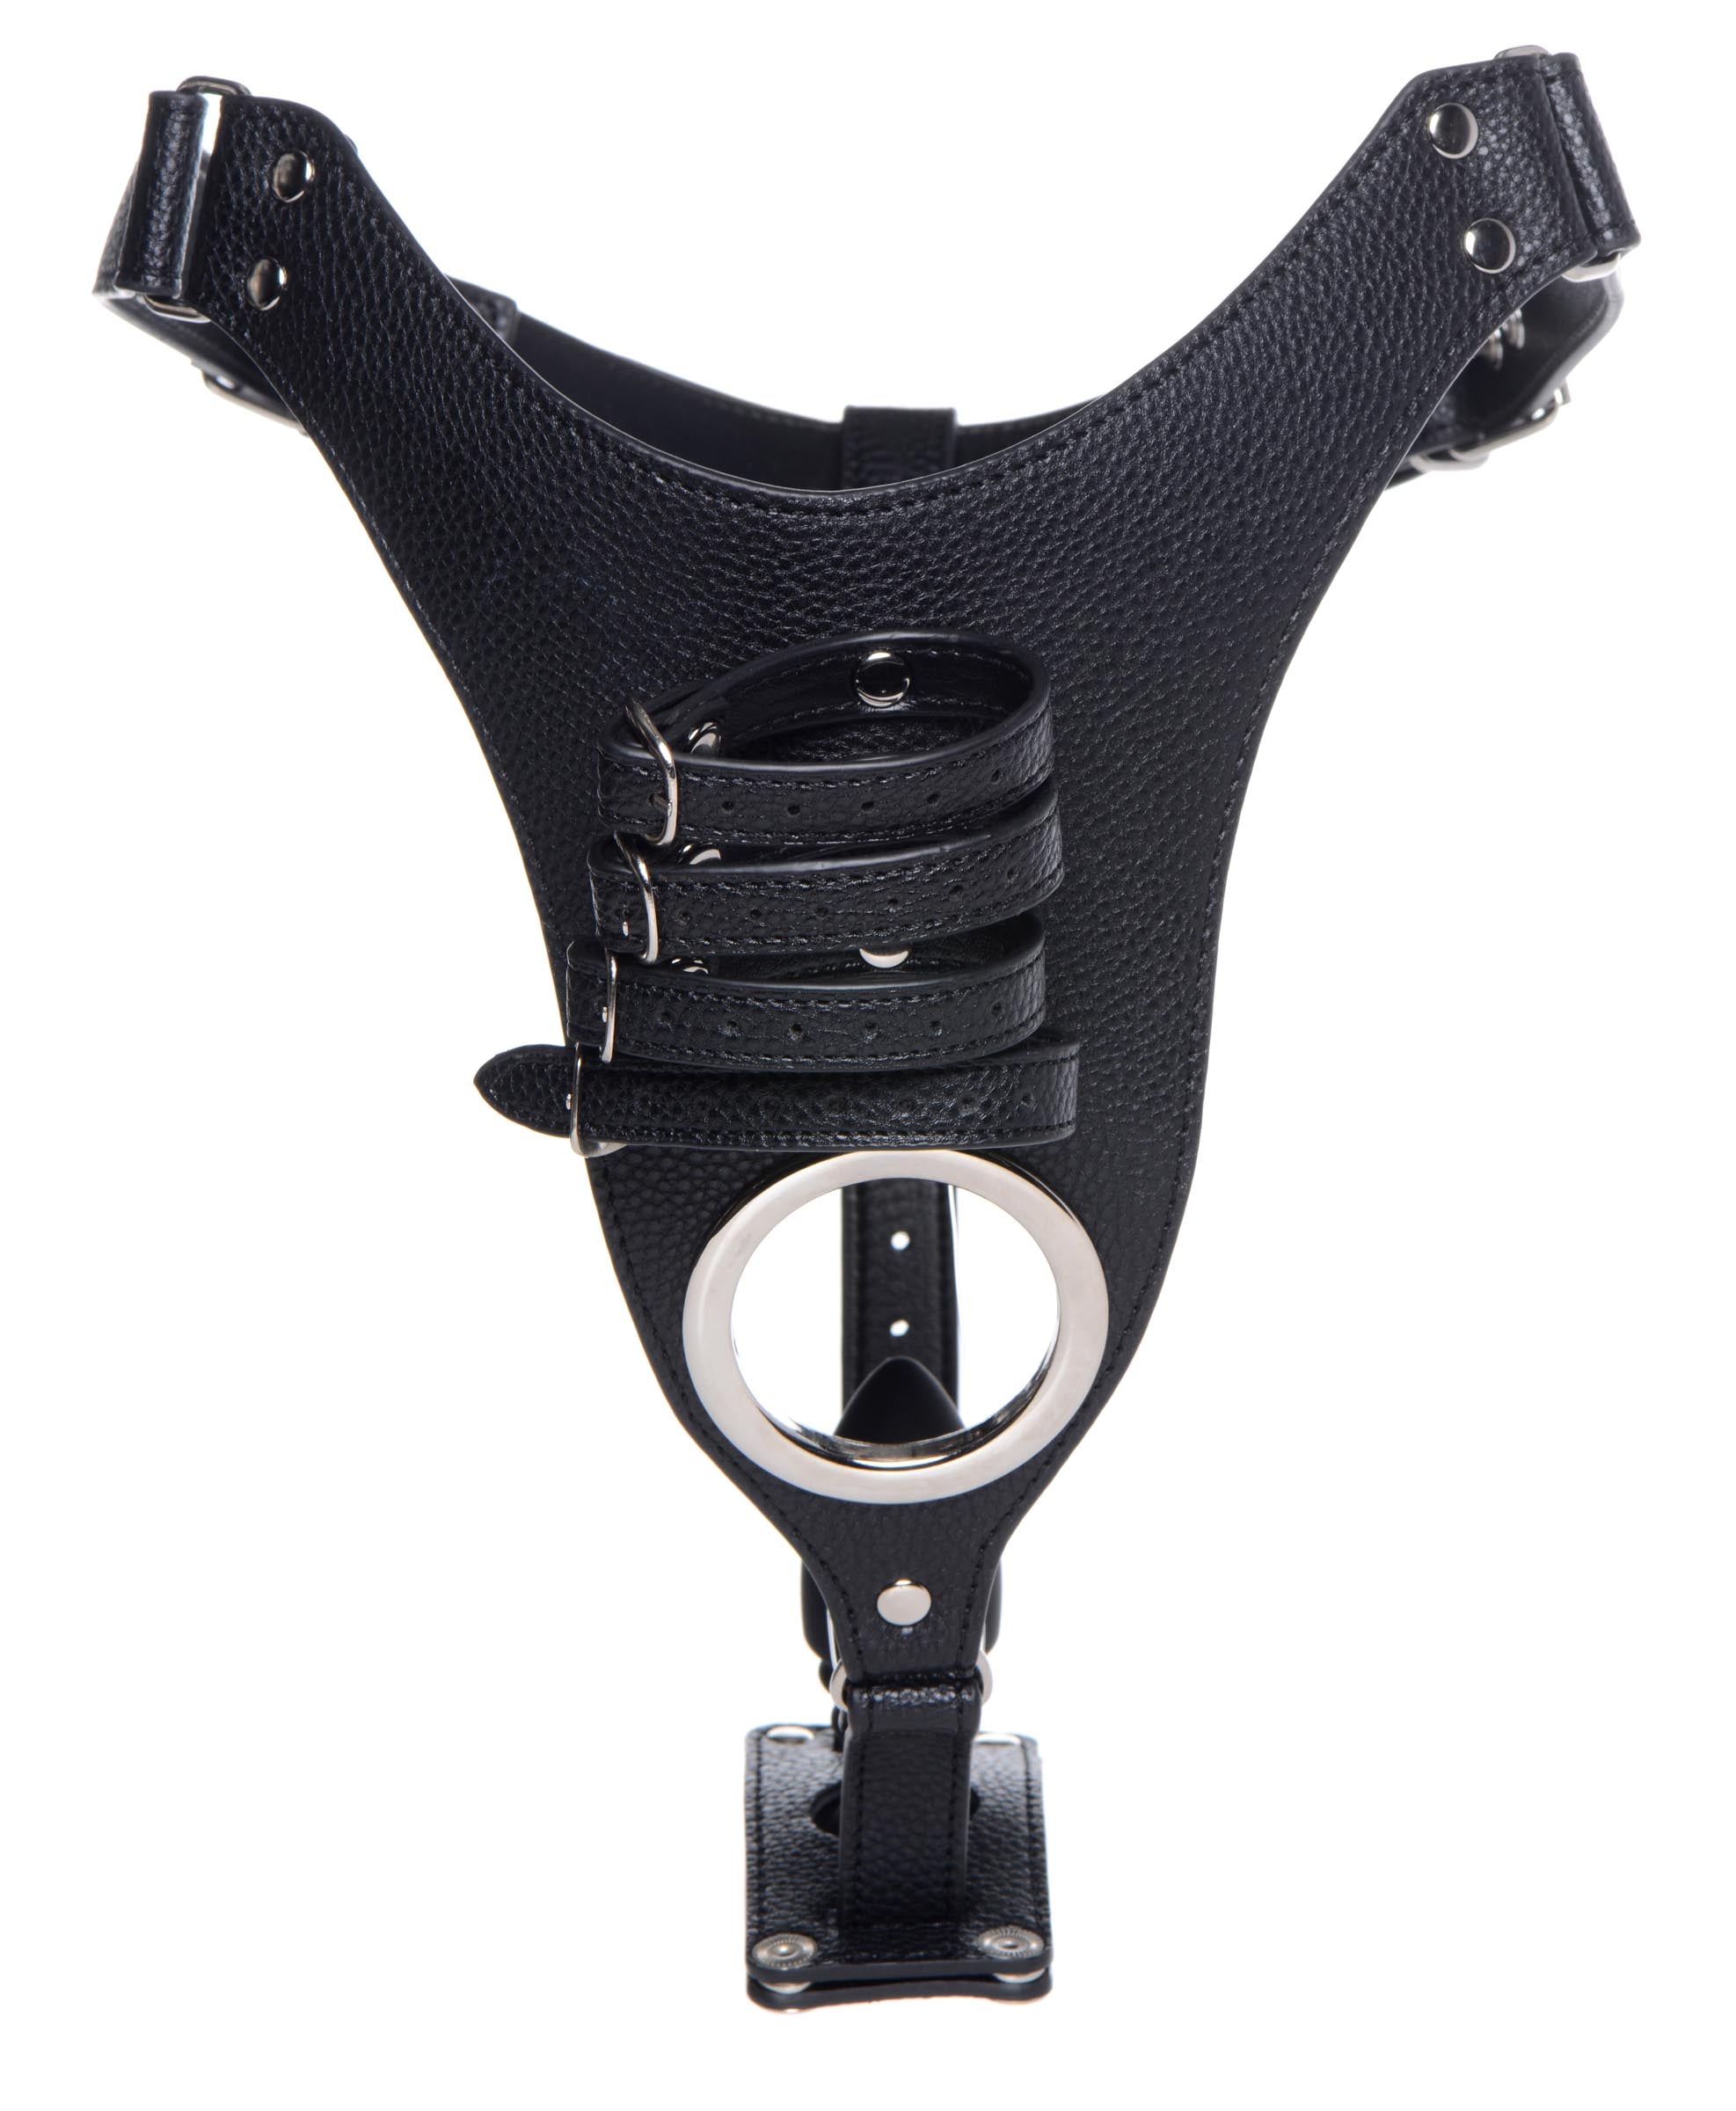 Male Chastity Harness with Silicone Anal Plug